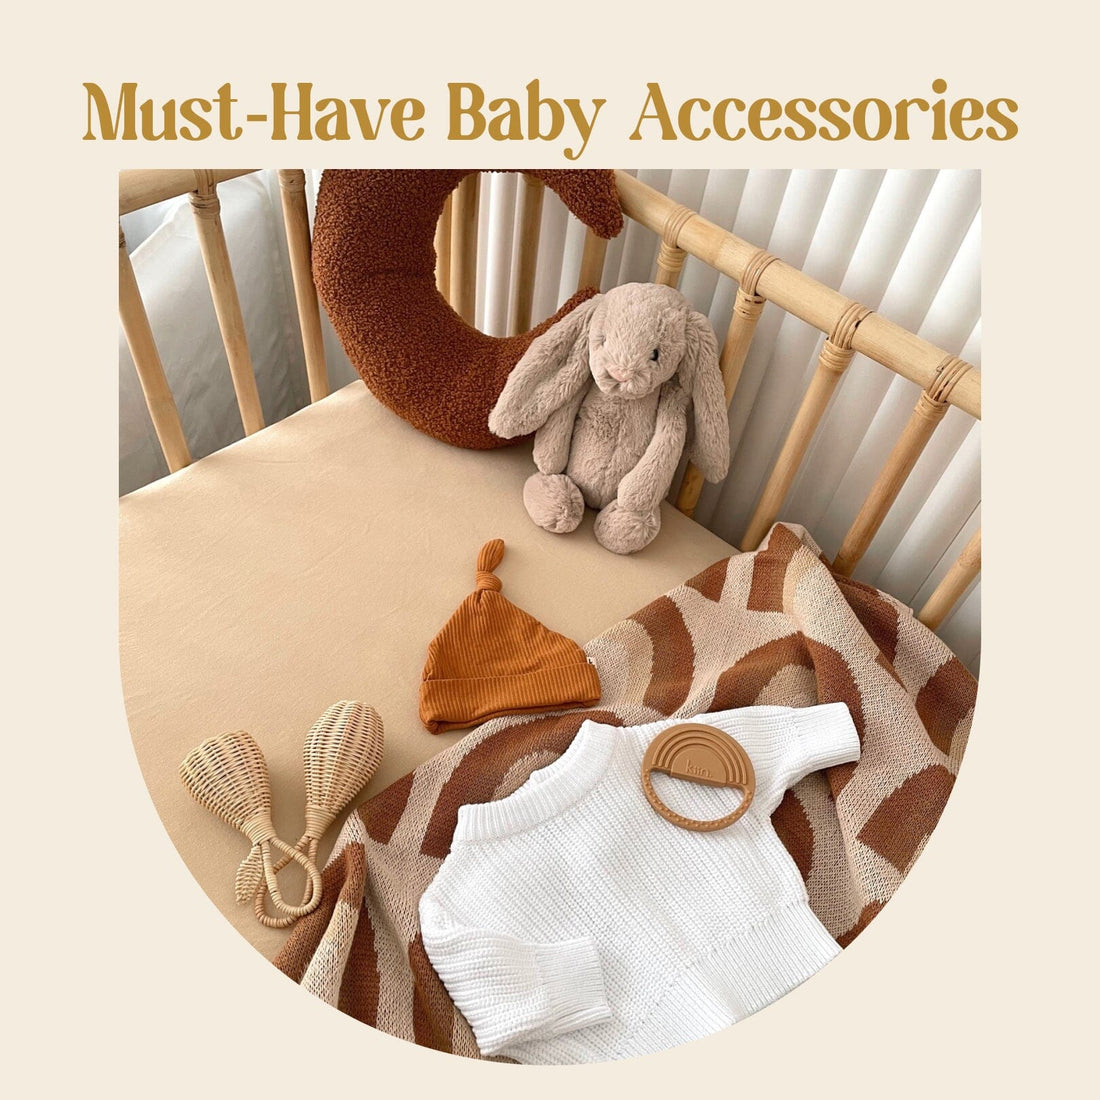 Adorable and Practical: Must-Have Baby Accessories for Your Little Bundle of Joy